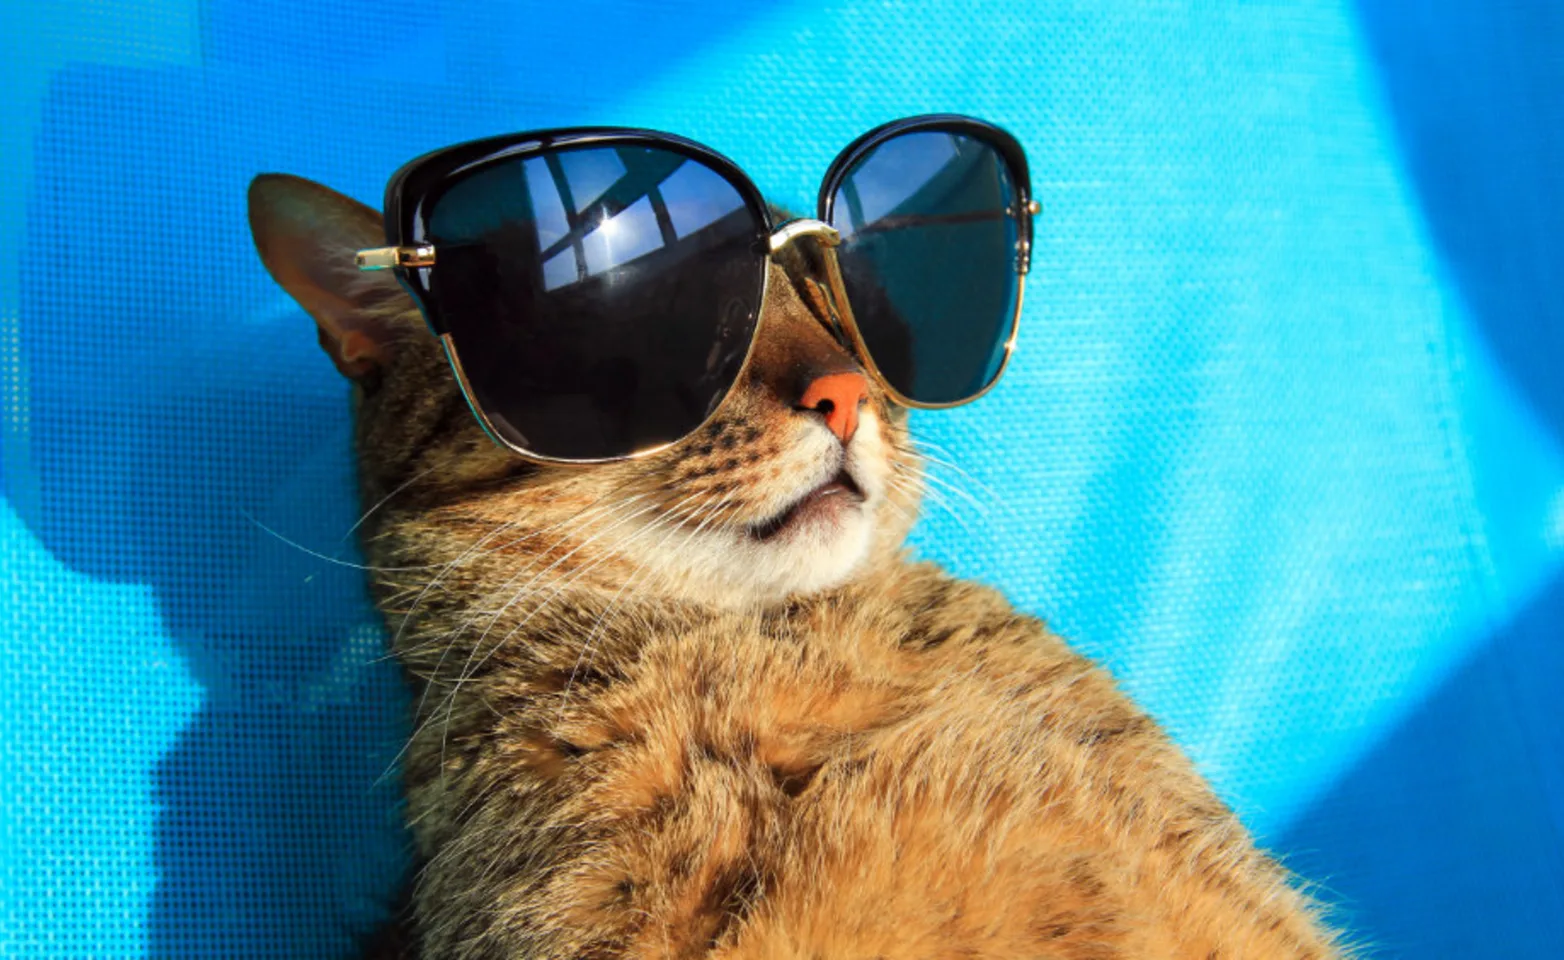 Cat laying on blue bed with sunglasses